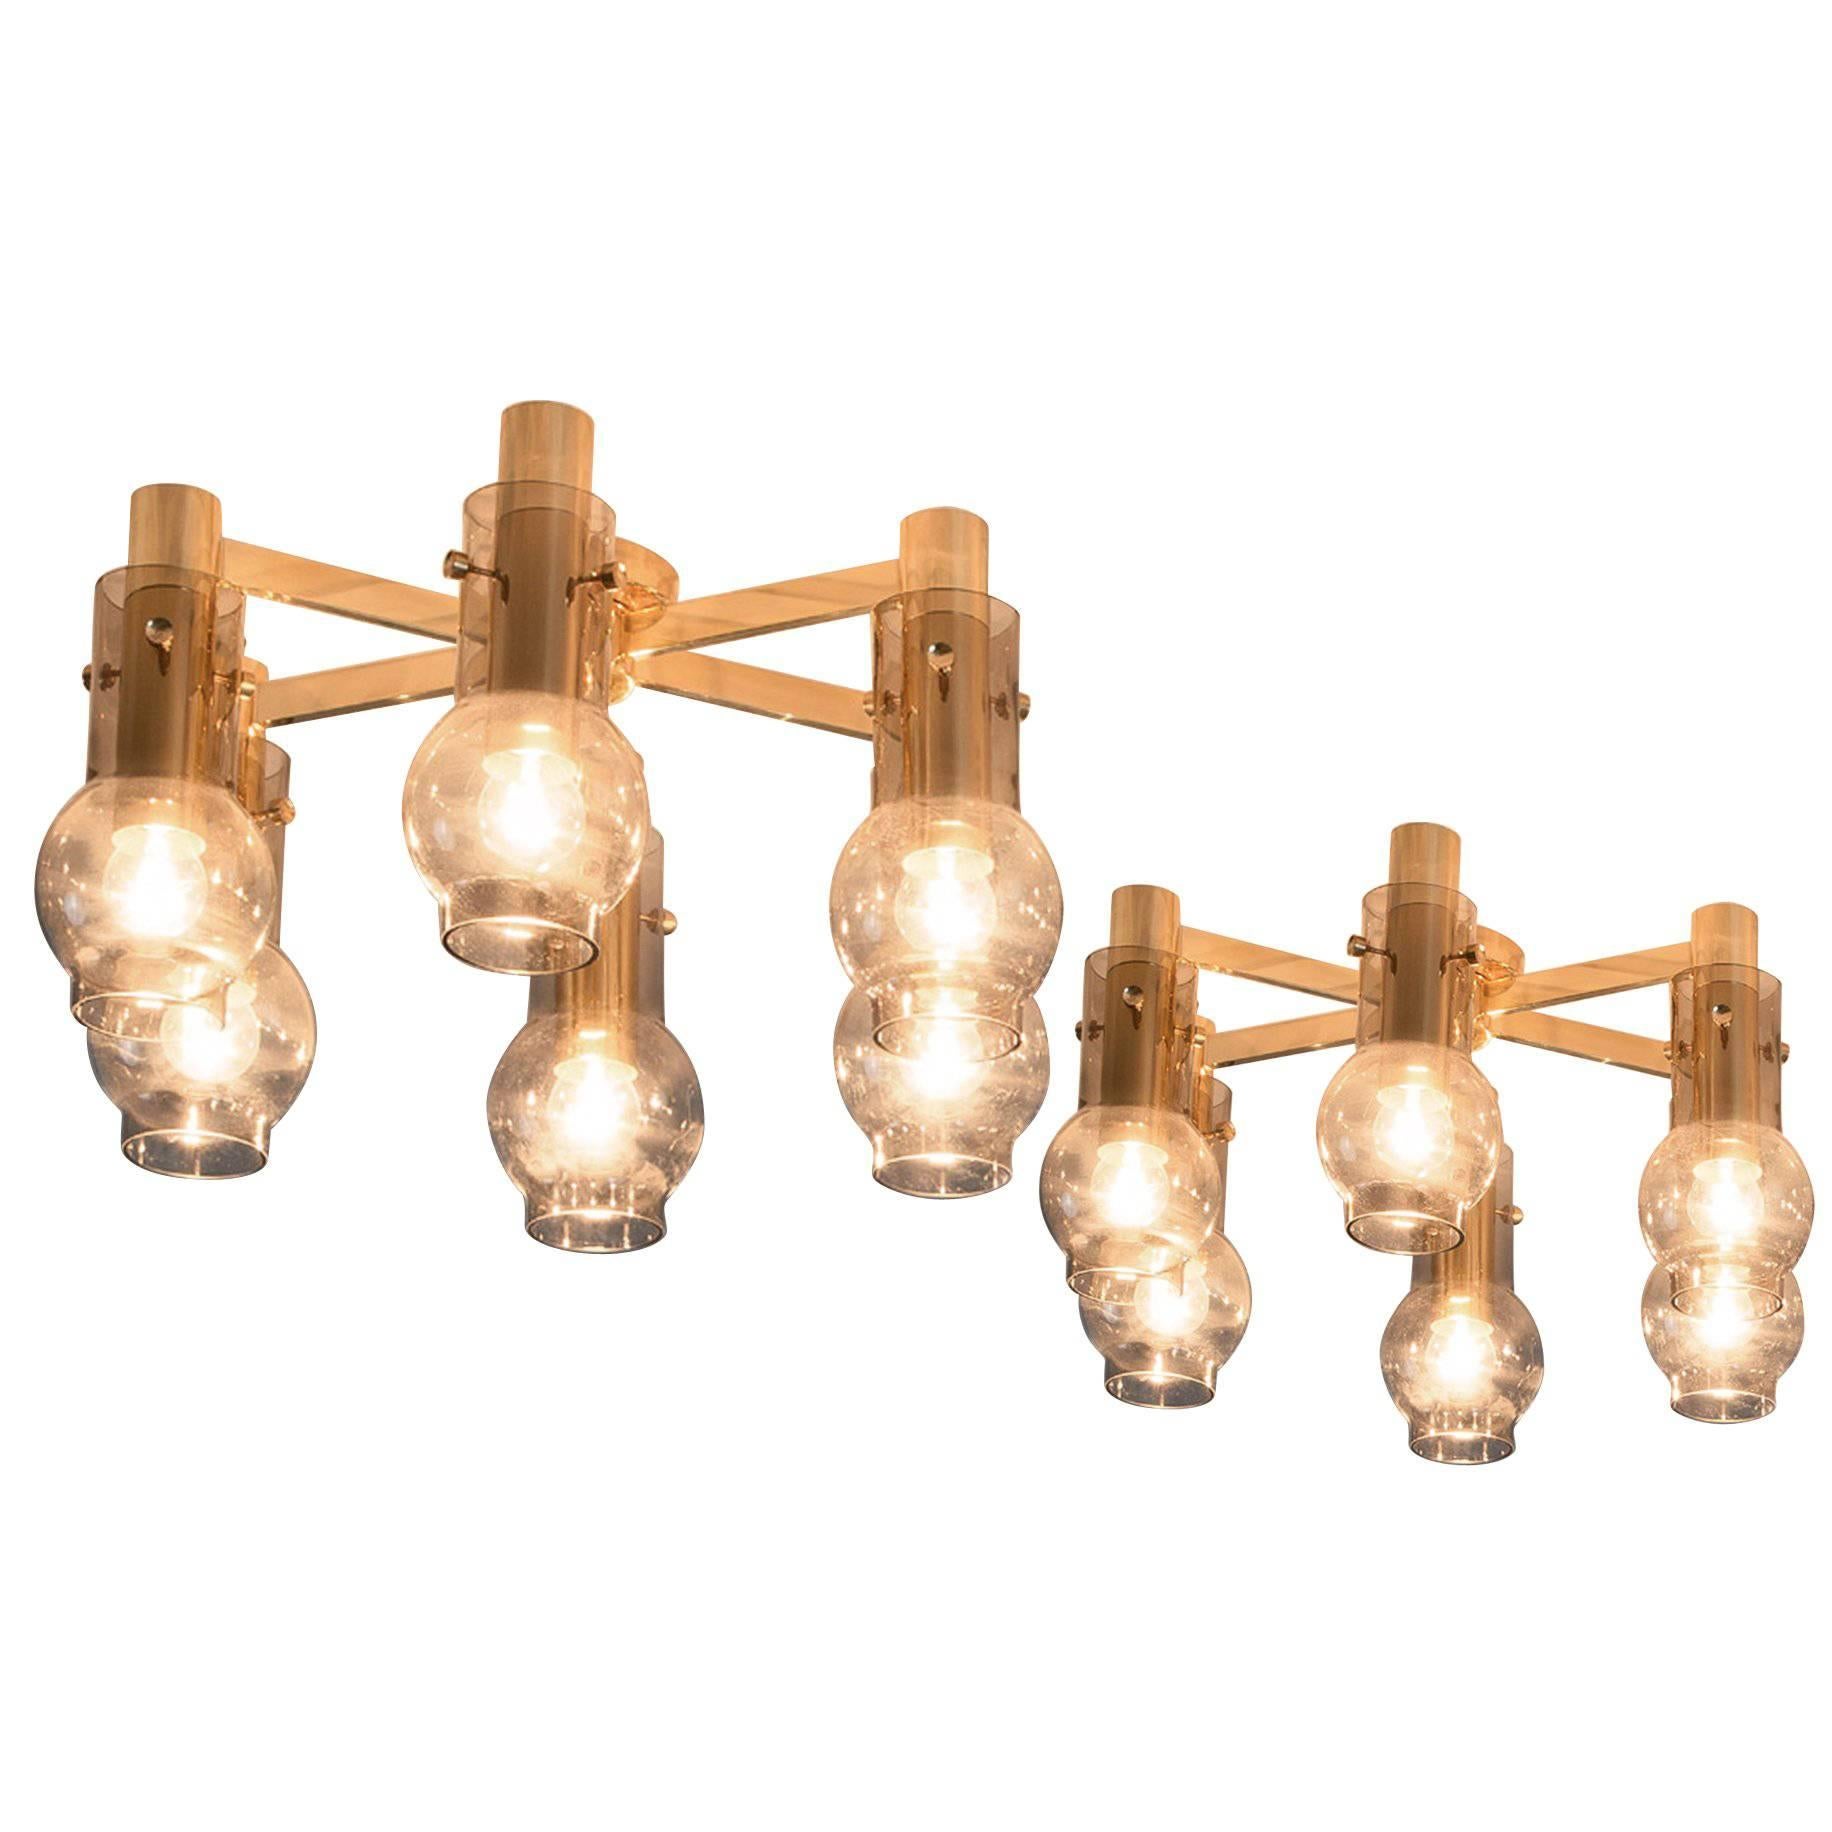 Set of Two Swedish Brass Chandeliers with Smoked Glass Shades